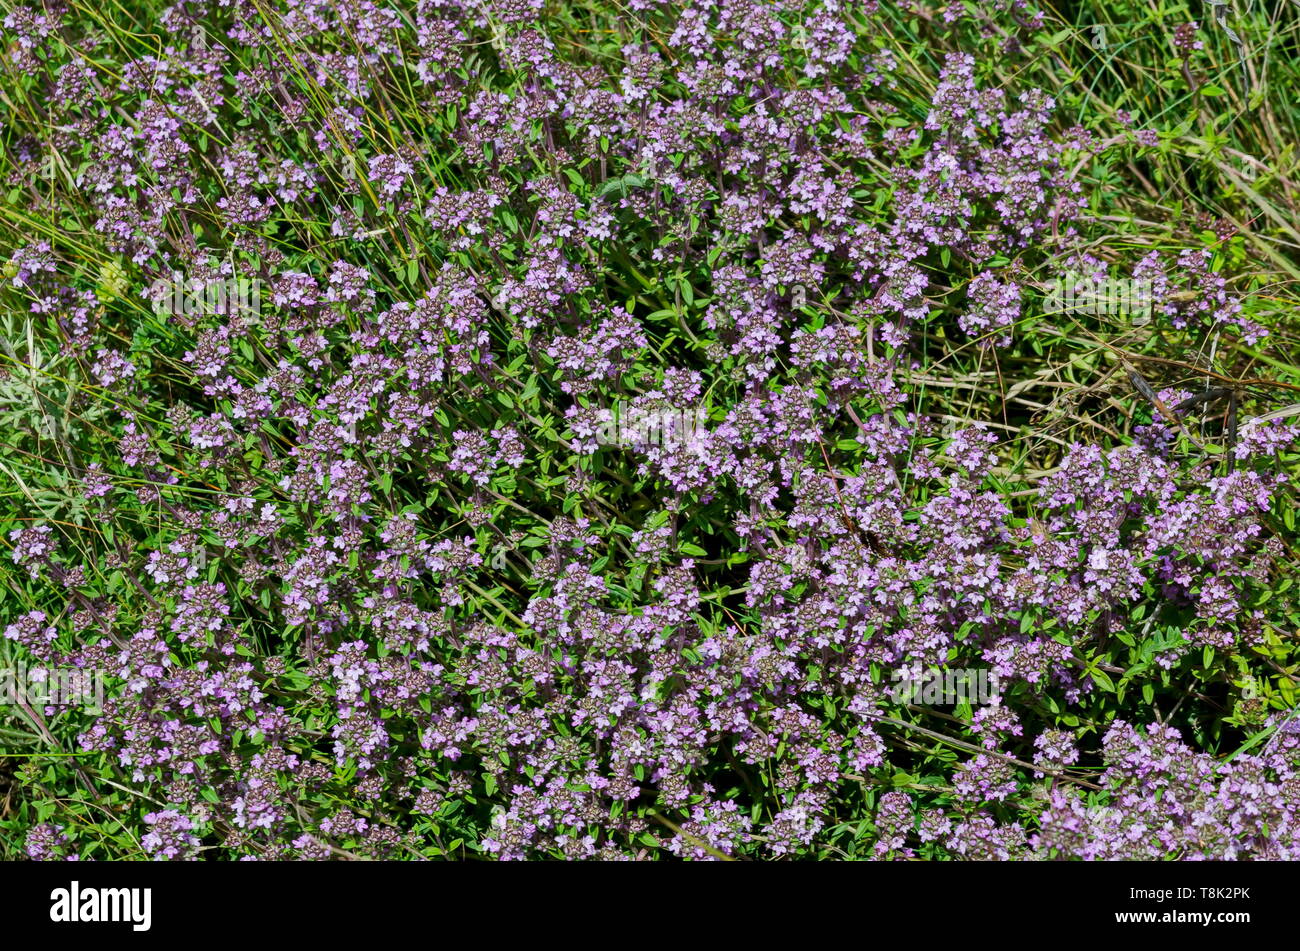 Garden thyme, Thymus serpillorum, Breckland thyme, wild thyme  or creeping thyme blossoming in the field of herbs, Plana mountain, Bulgaria Stock Photo